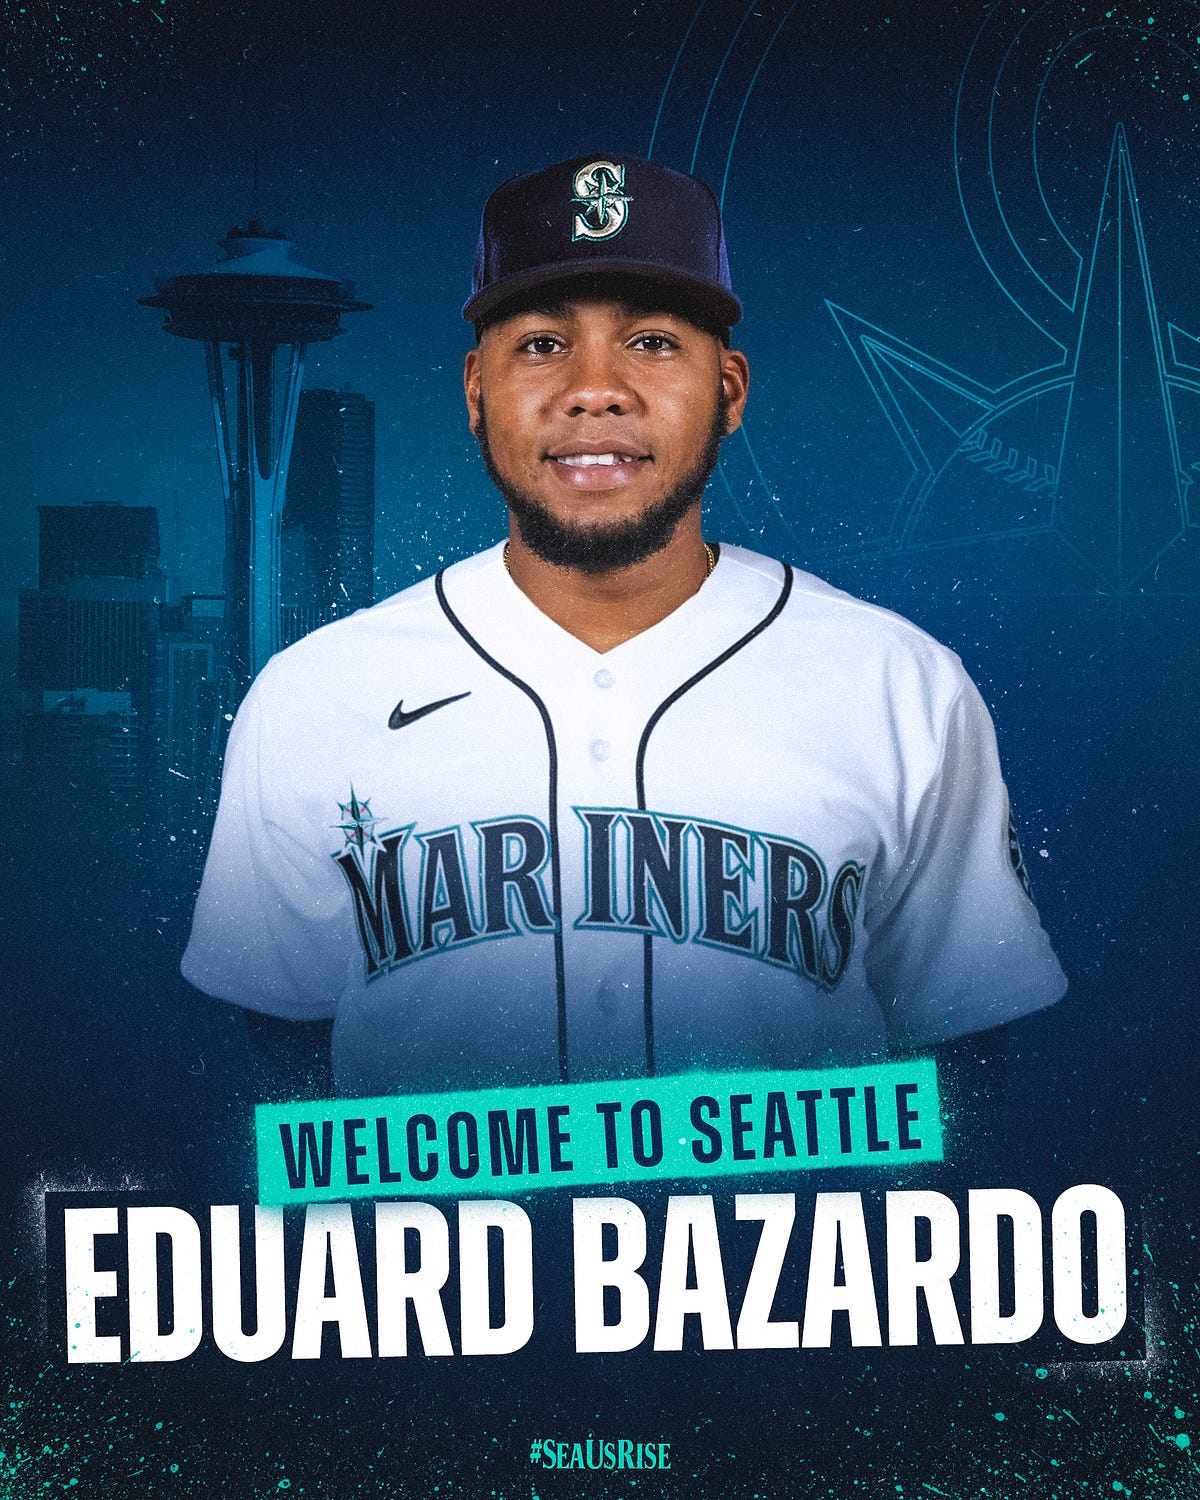 Mariners Acquire RHP Eduard Bazardo from Baltimore, by Mariners PR